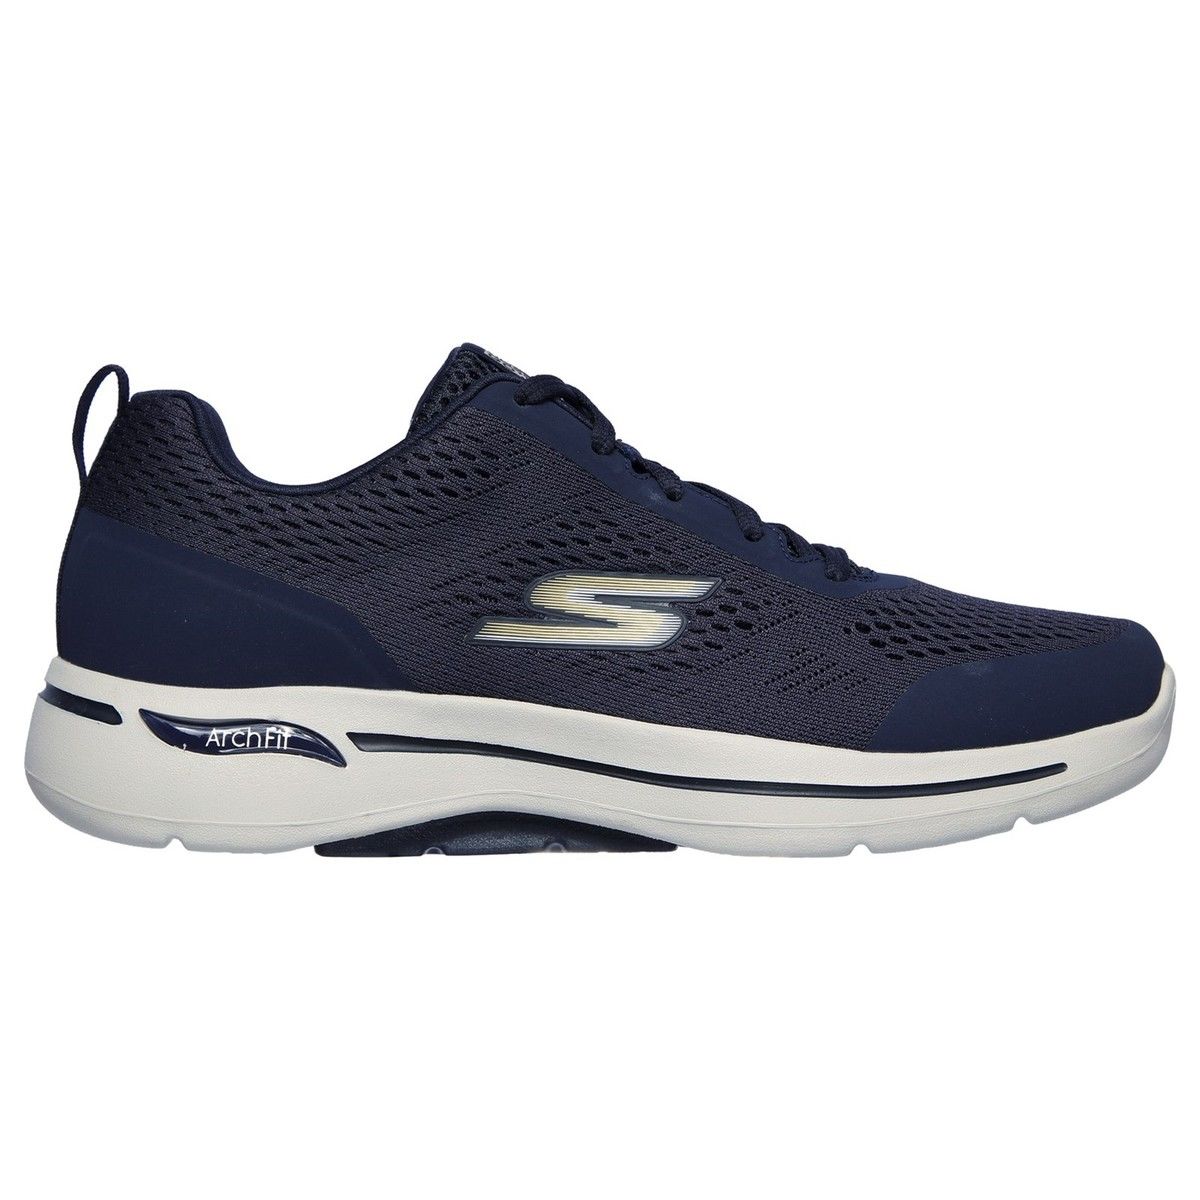 Skechers Go Walk Arch Fit NVGD Navy Gold Mens trainers